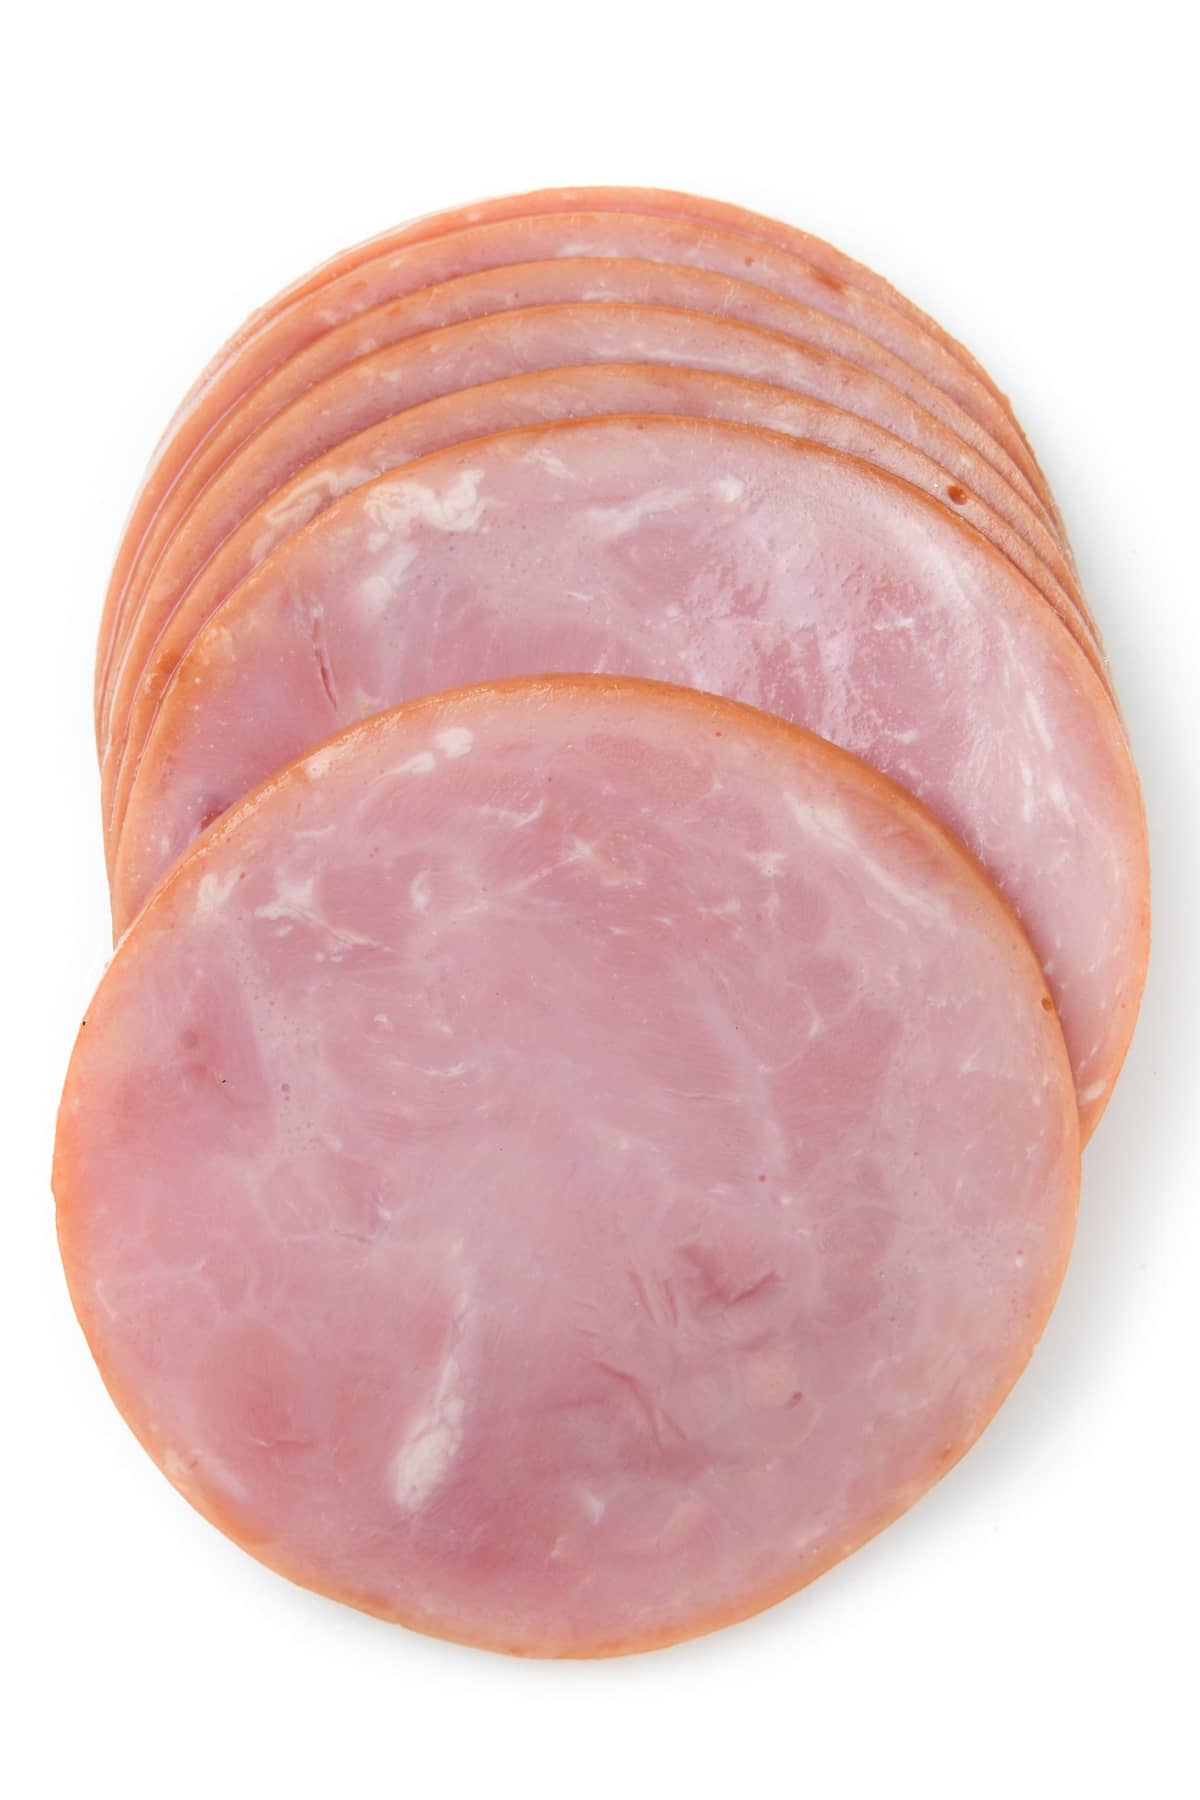 Sliced Canadian Bacon on white background from above